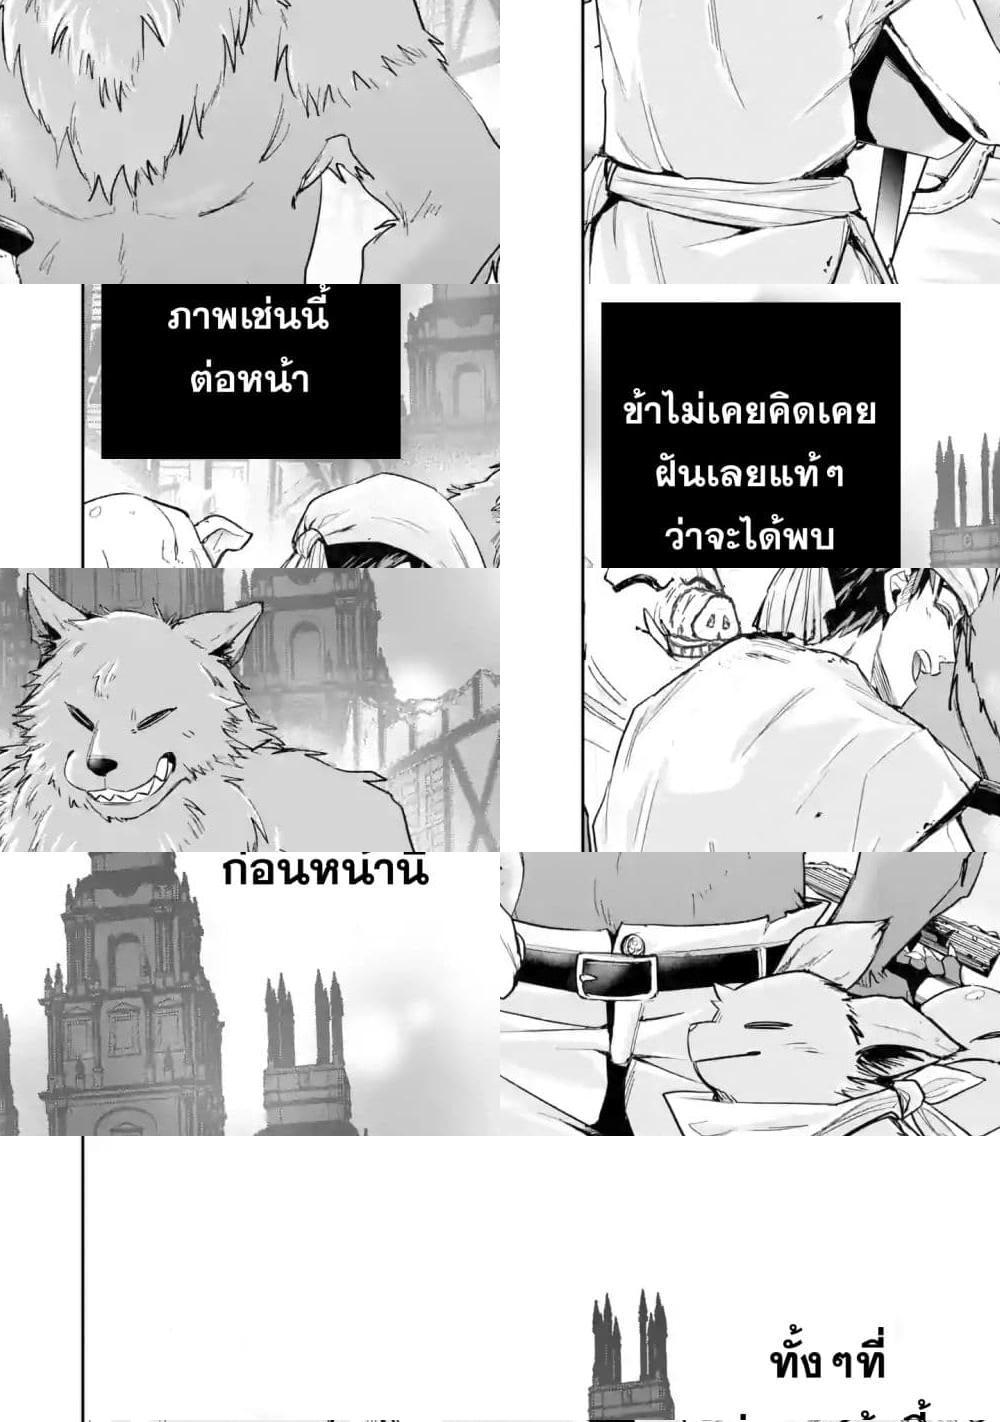 The Executed Sage Is Reincarnated as a Lich and Starts an All-Out War - เจ้ามีปัญหาอะไรหรือไม่? (2) - 2